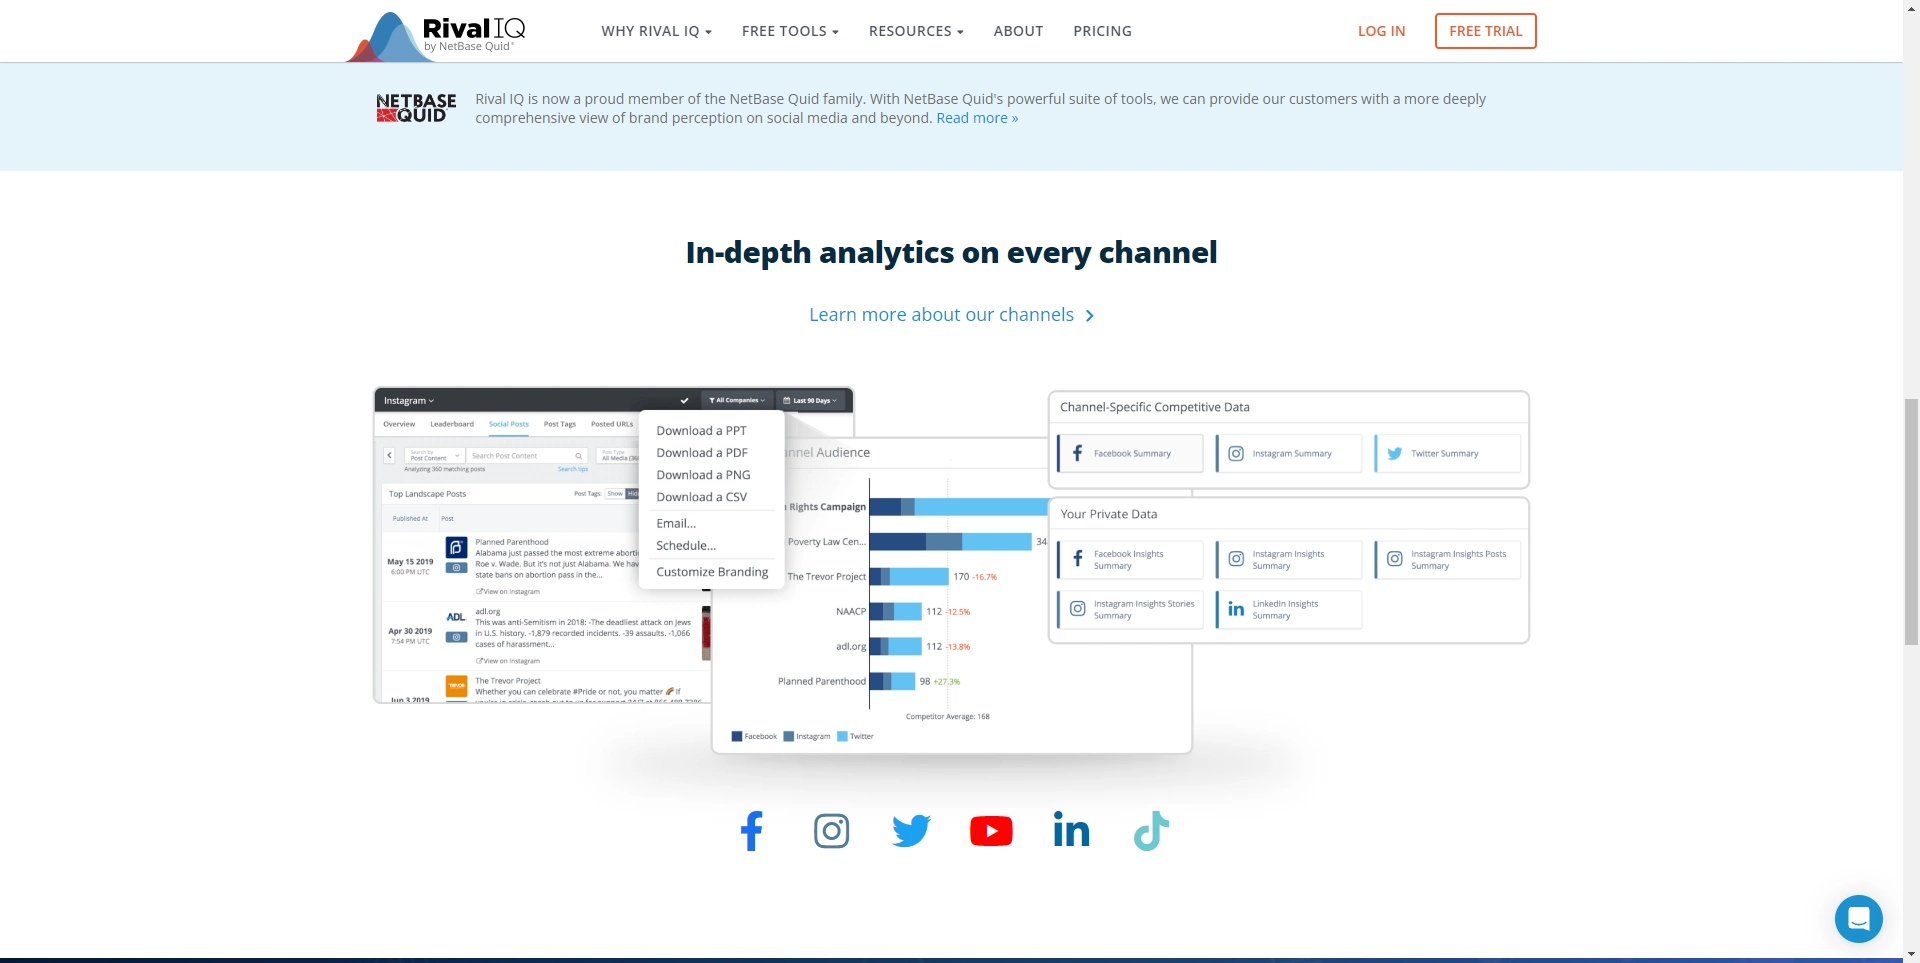 Rival IQ analytics channel visual showing specific data